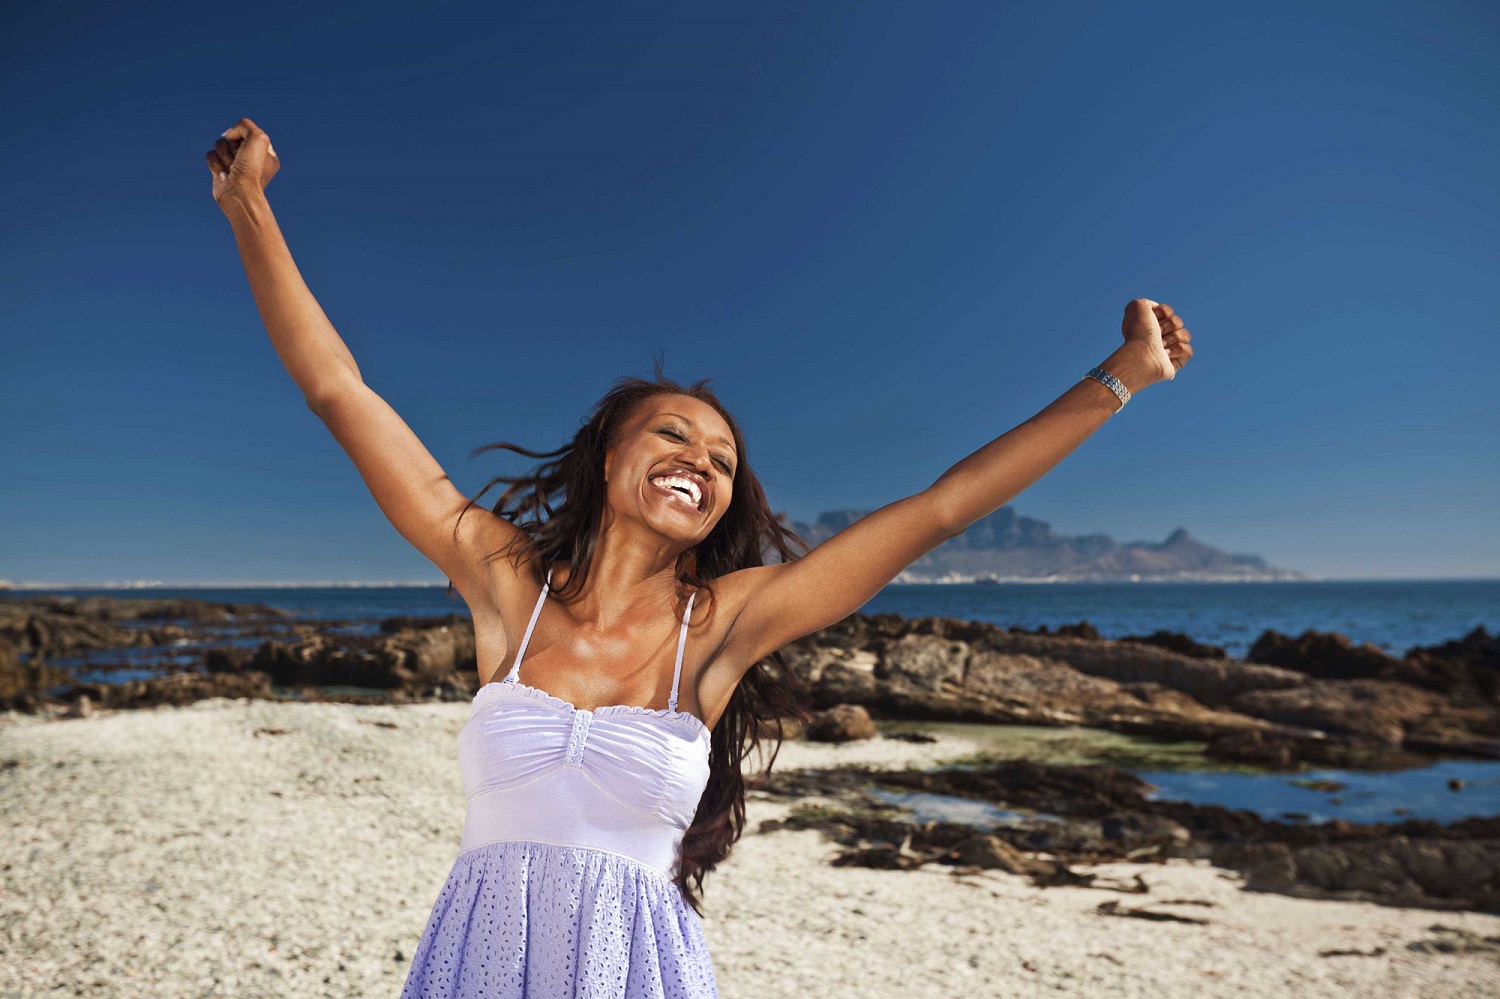 Photo of person with hands in the air, expressing joy or happiness